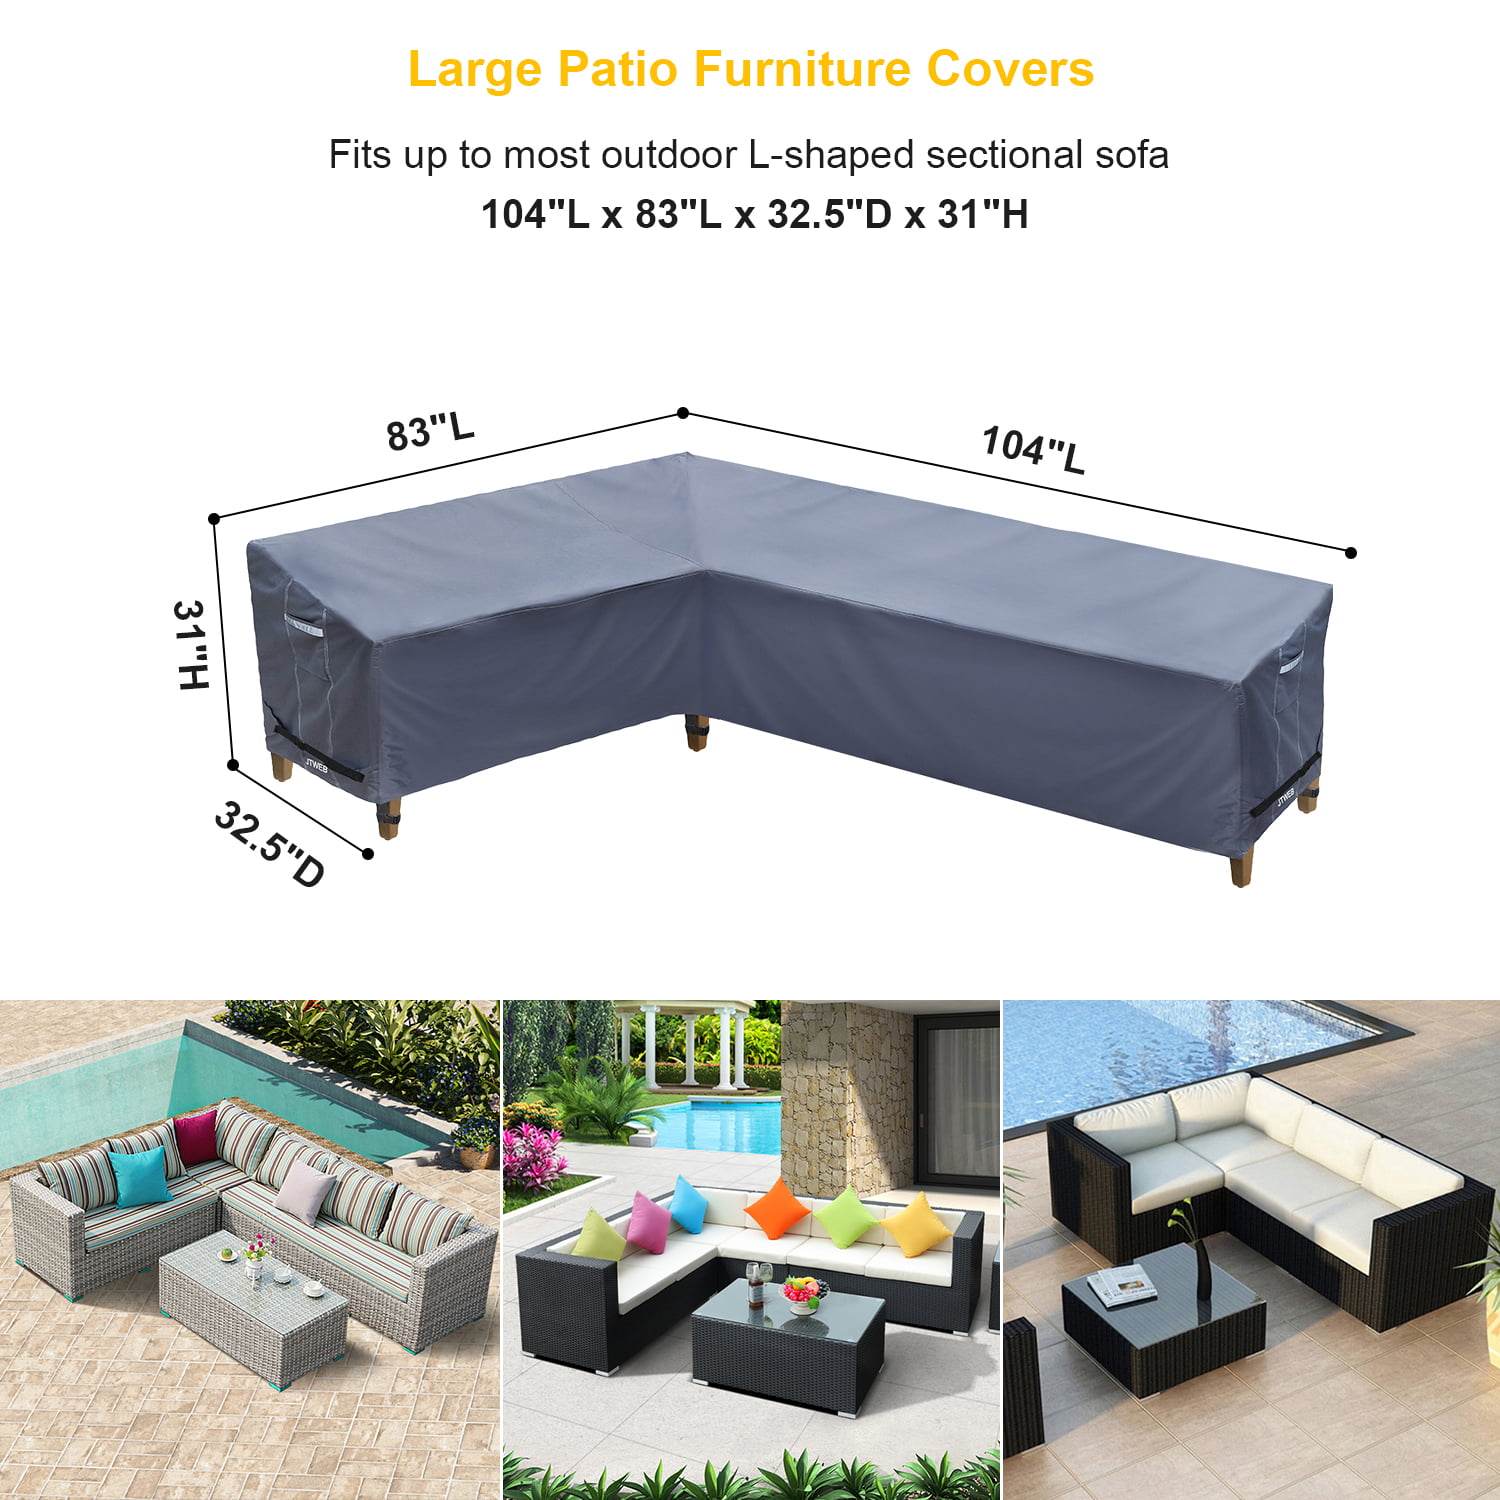 Heavy Duty Outdoor Sectional Sofa Cover V-Shaped Lawn Patio Furniture Winter Cover 100% Waterproof 600D Patio Sectional Couch Cover 